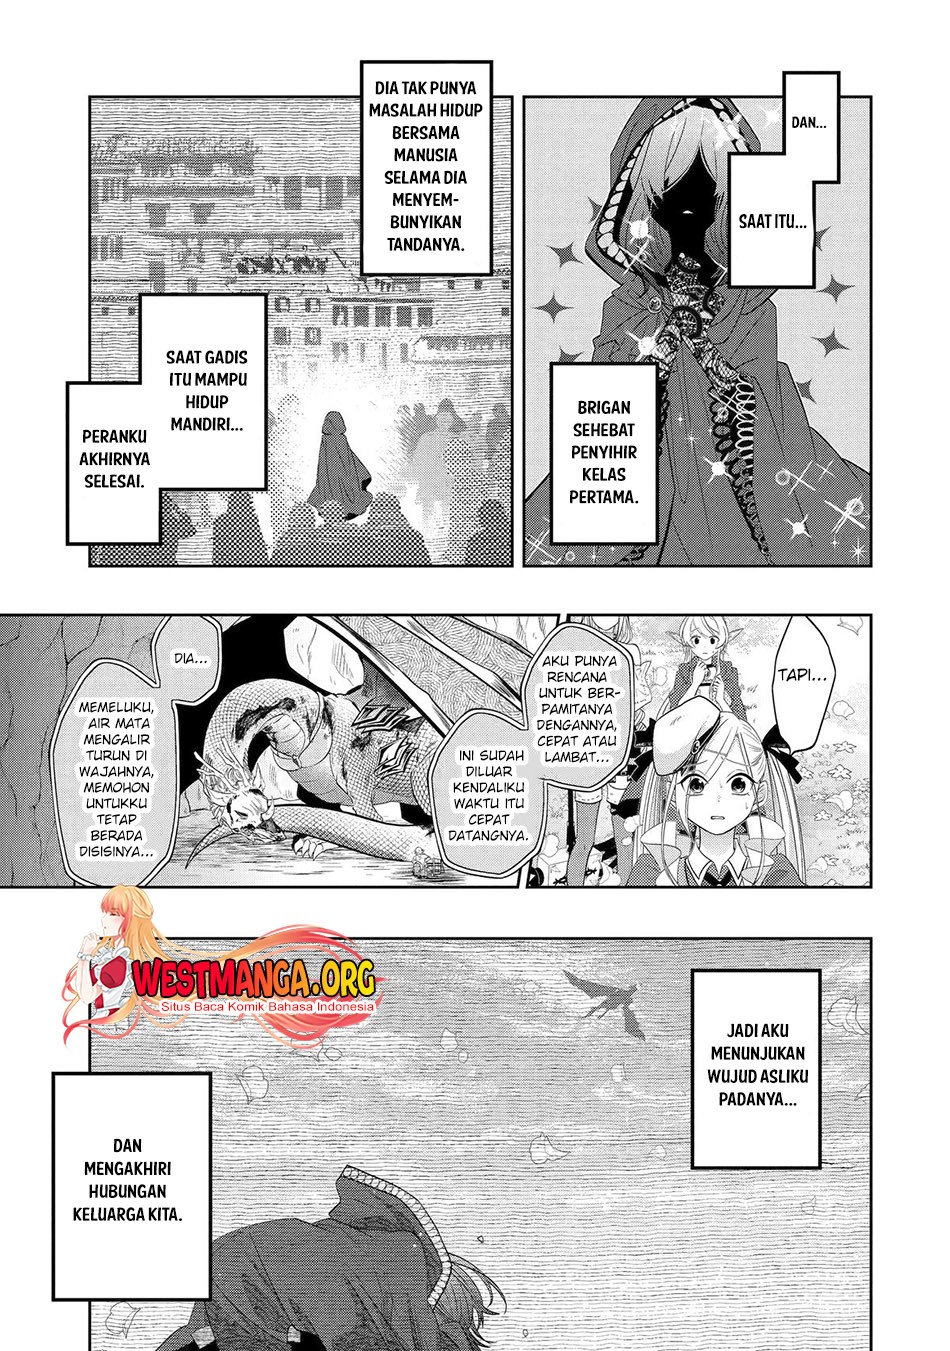 Level 0 Evil King Become The Adventurer In The New World Chapter 20